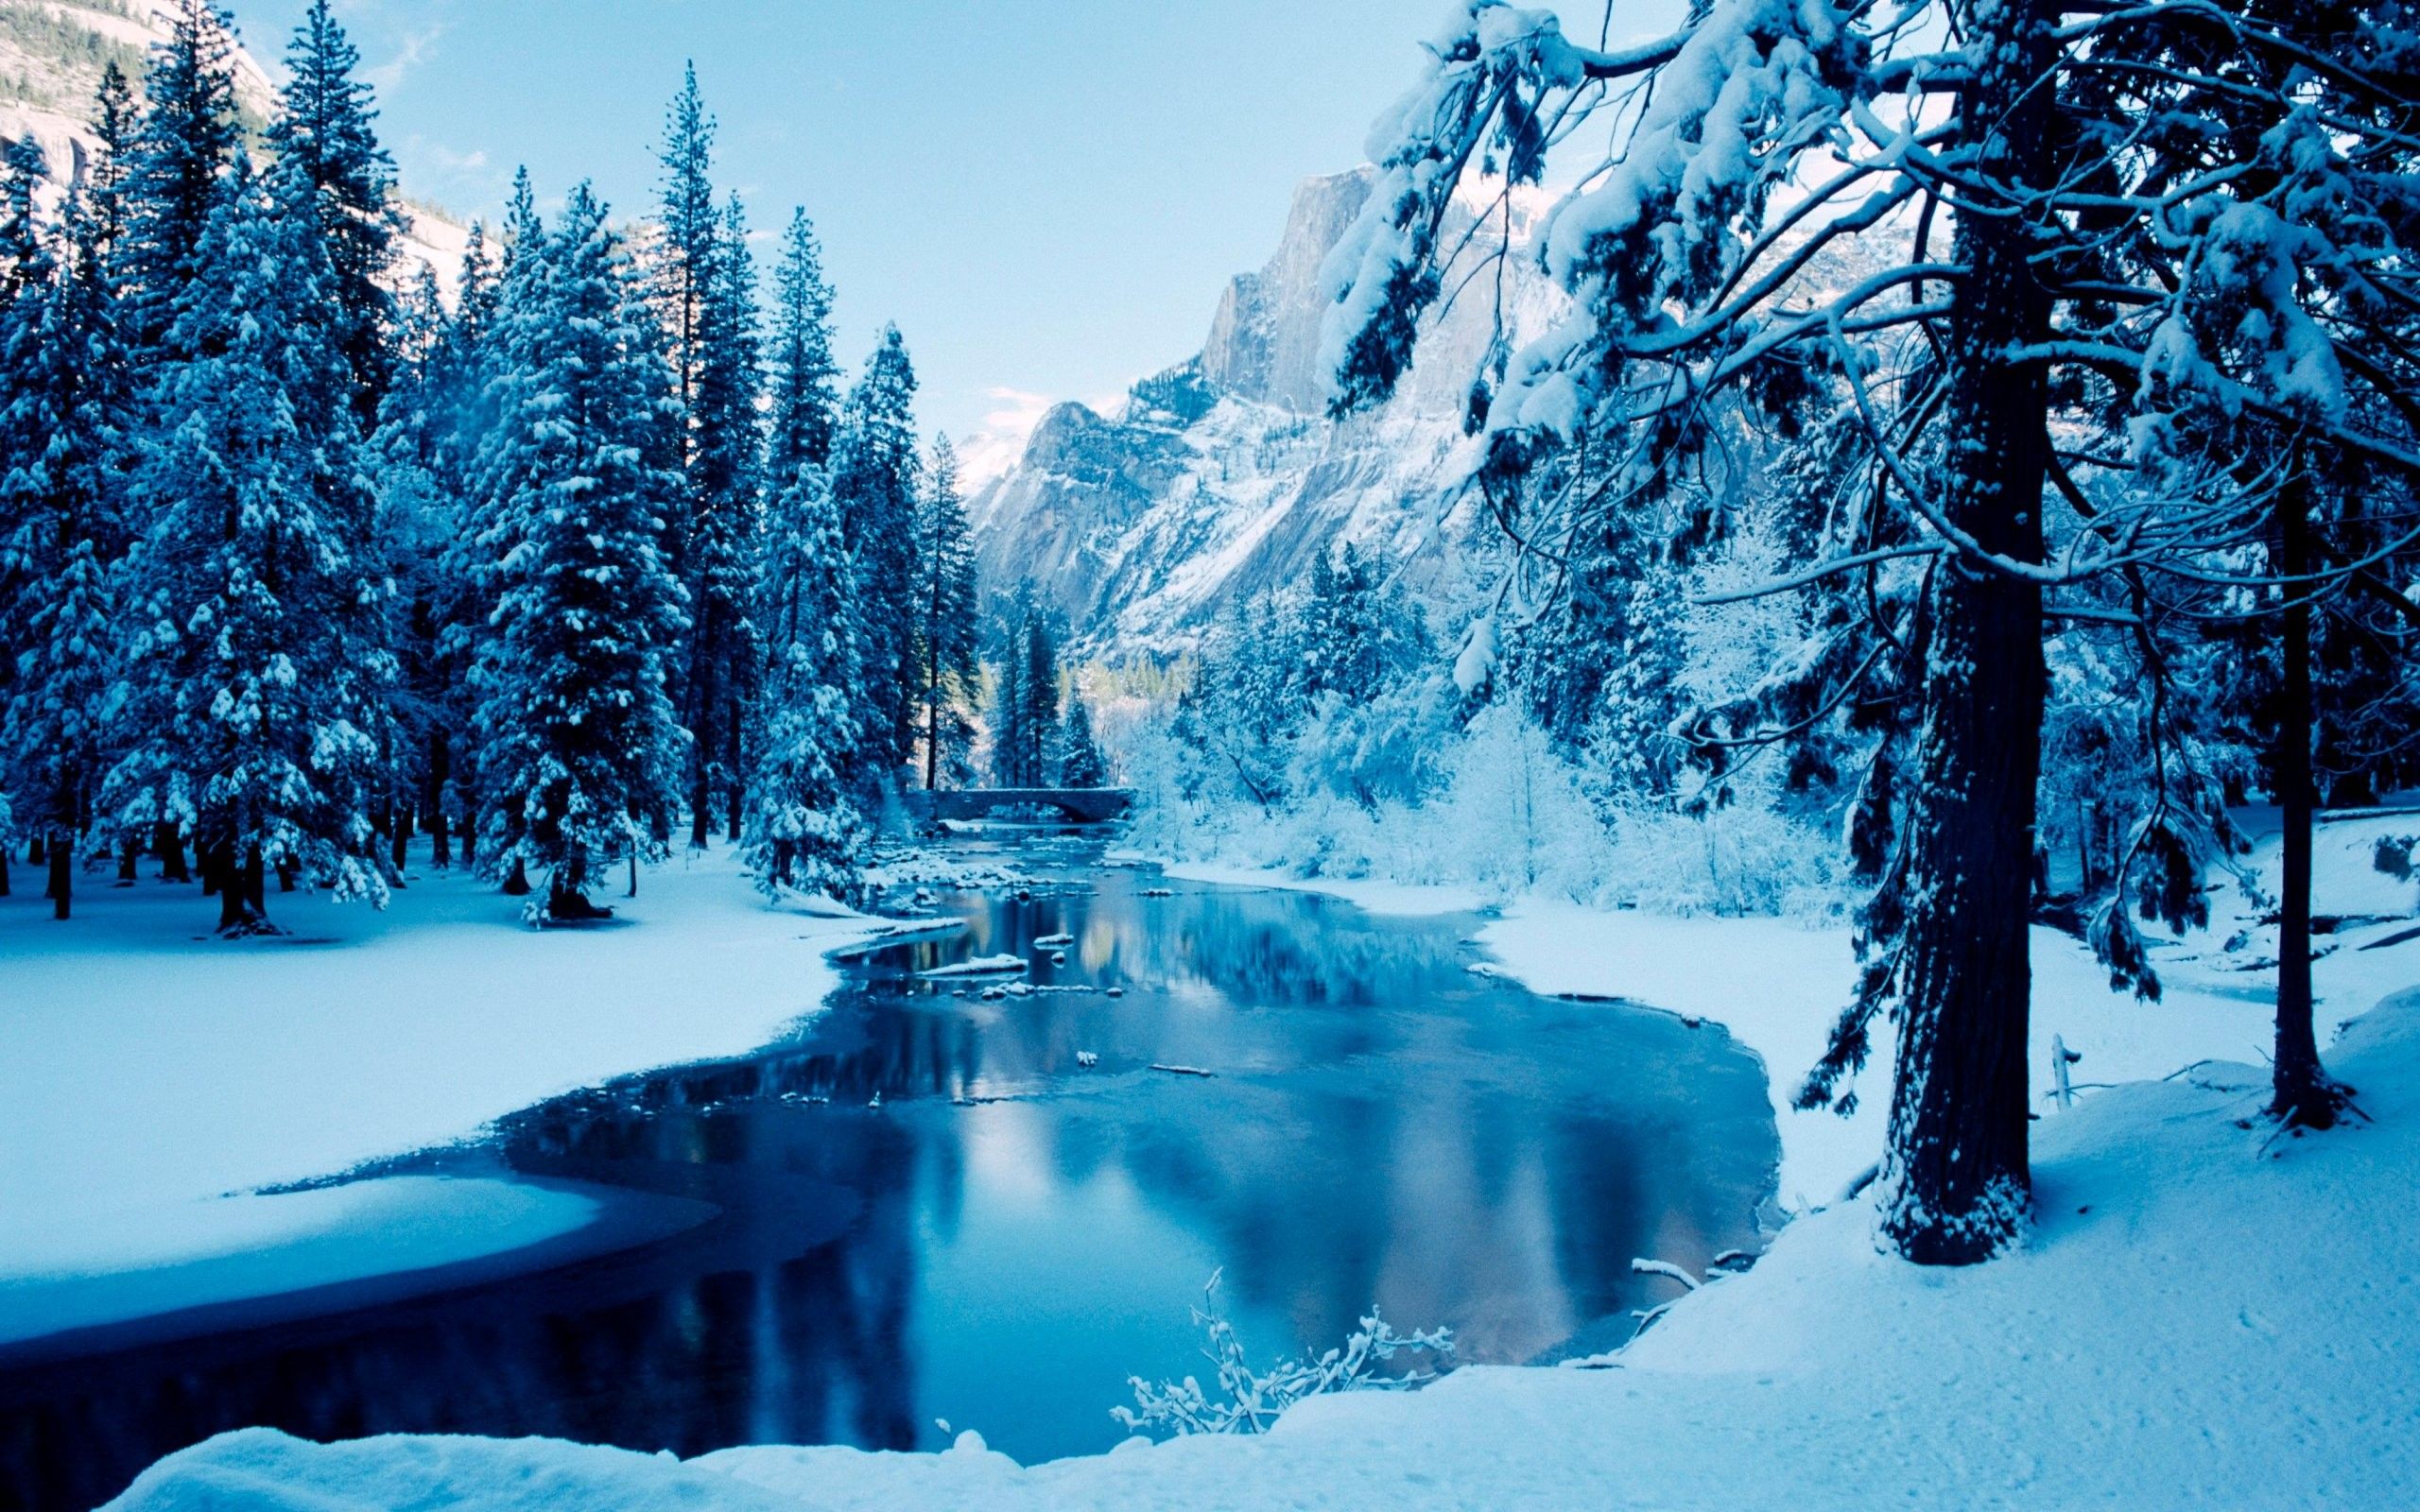 Frozen Creek Winter Wallpaper Windows 10 Background Amazing Colourful 4k Free Quality Image Cool Colours 2560x1600